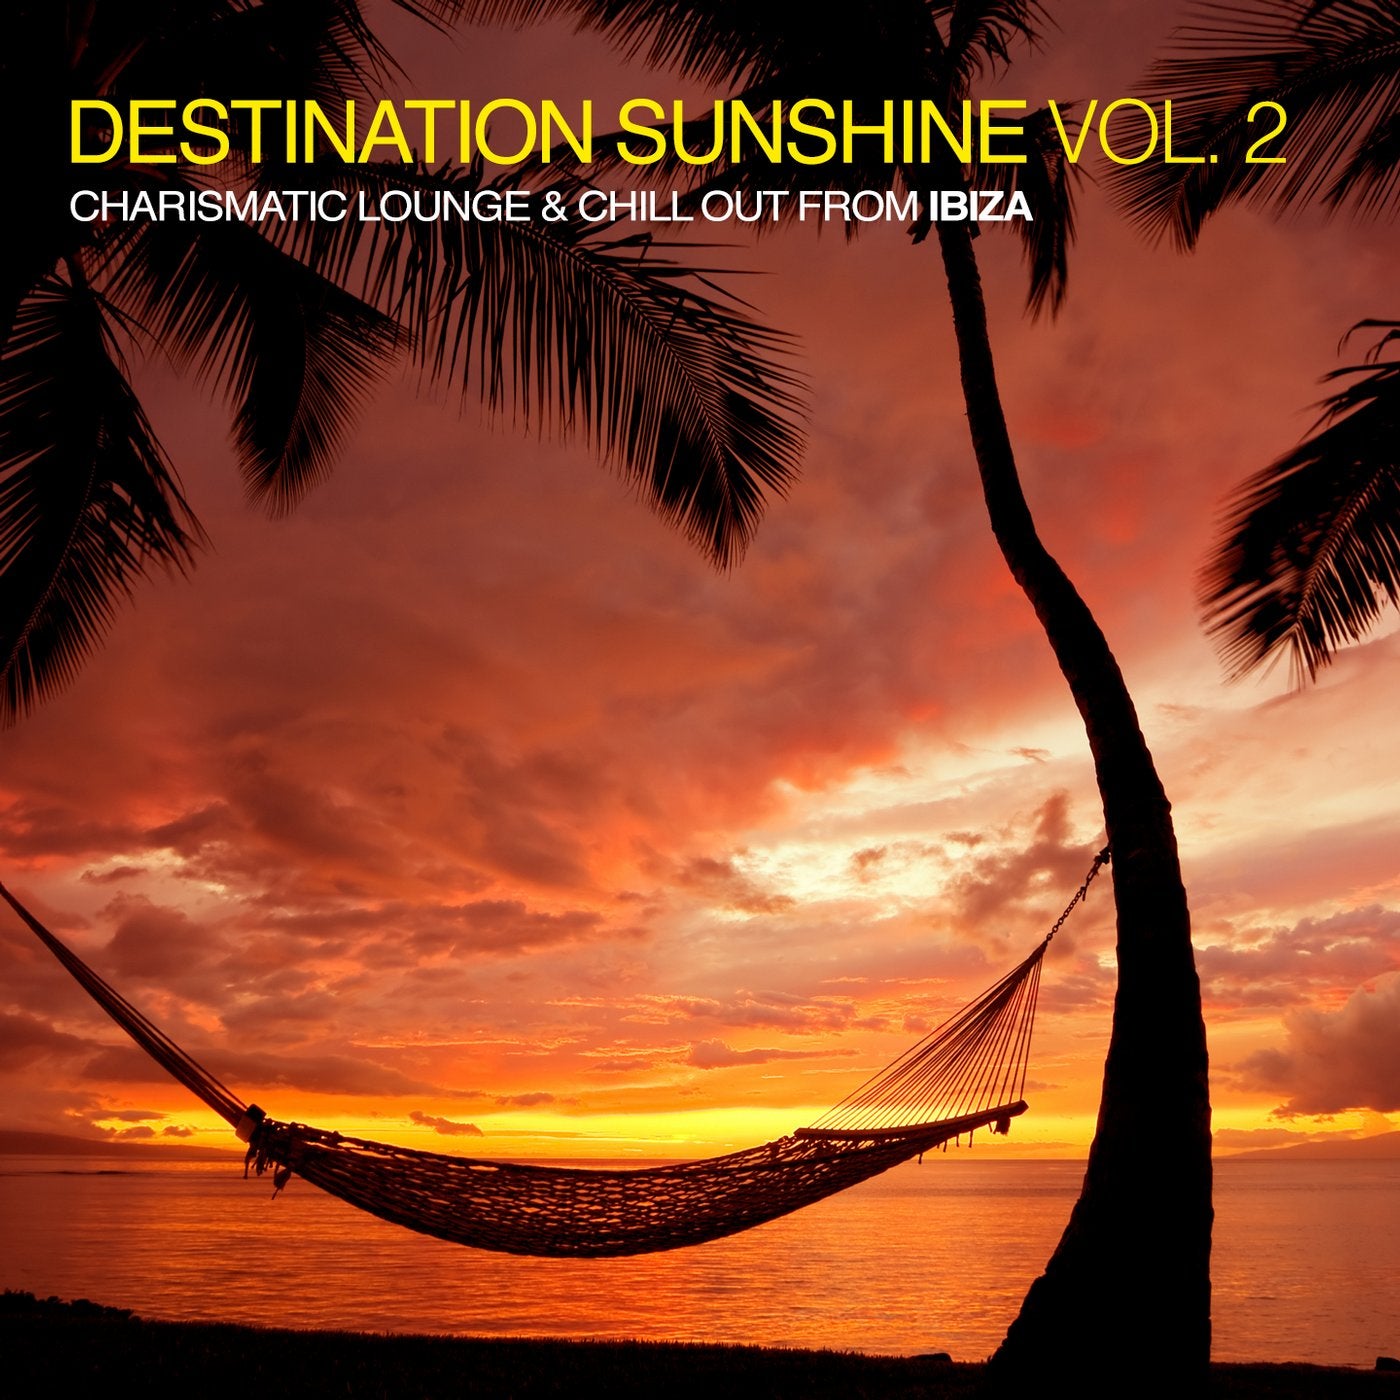 Destination Sunshine Vol. 2 - Charismatic Lounge & Chill Out From Ibiza